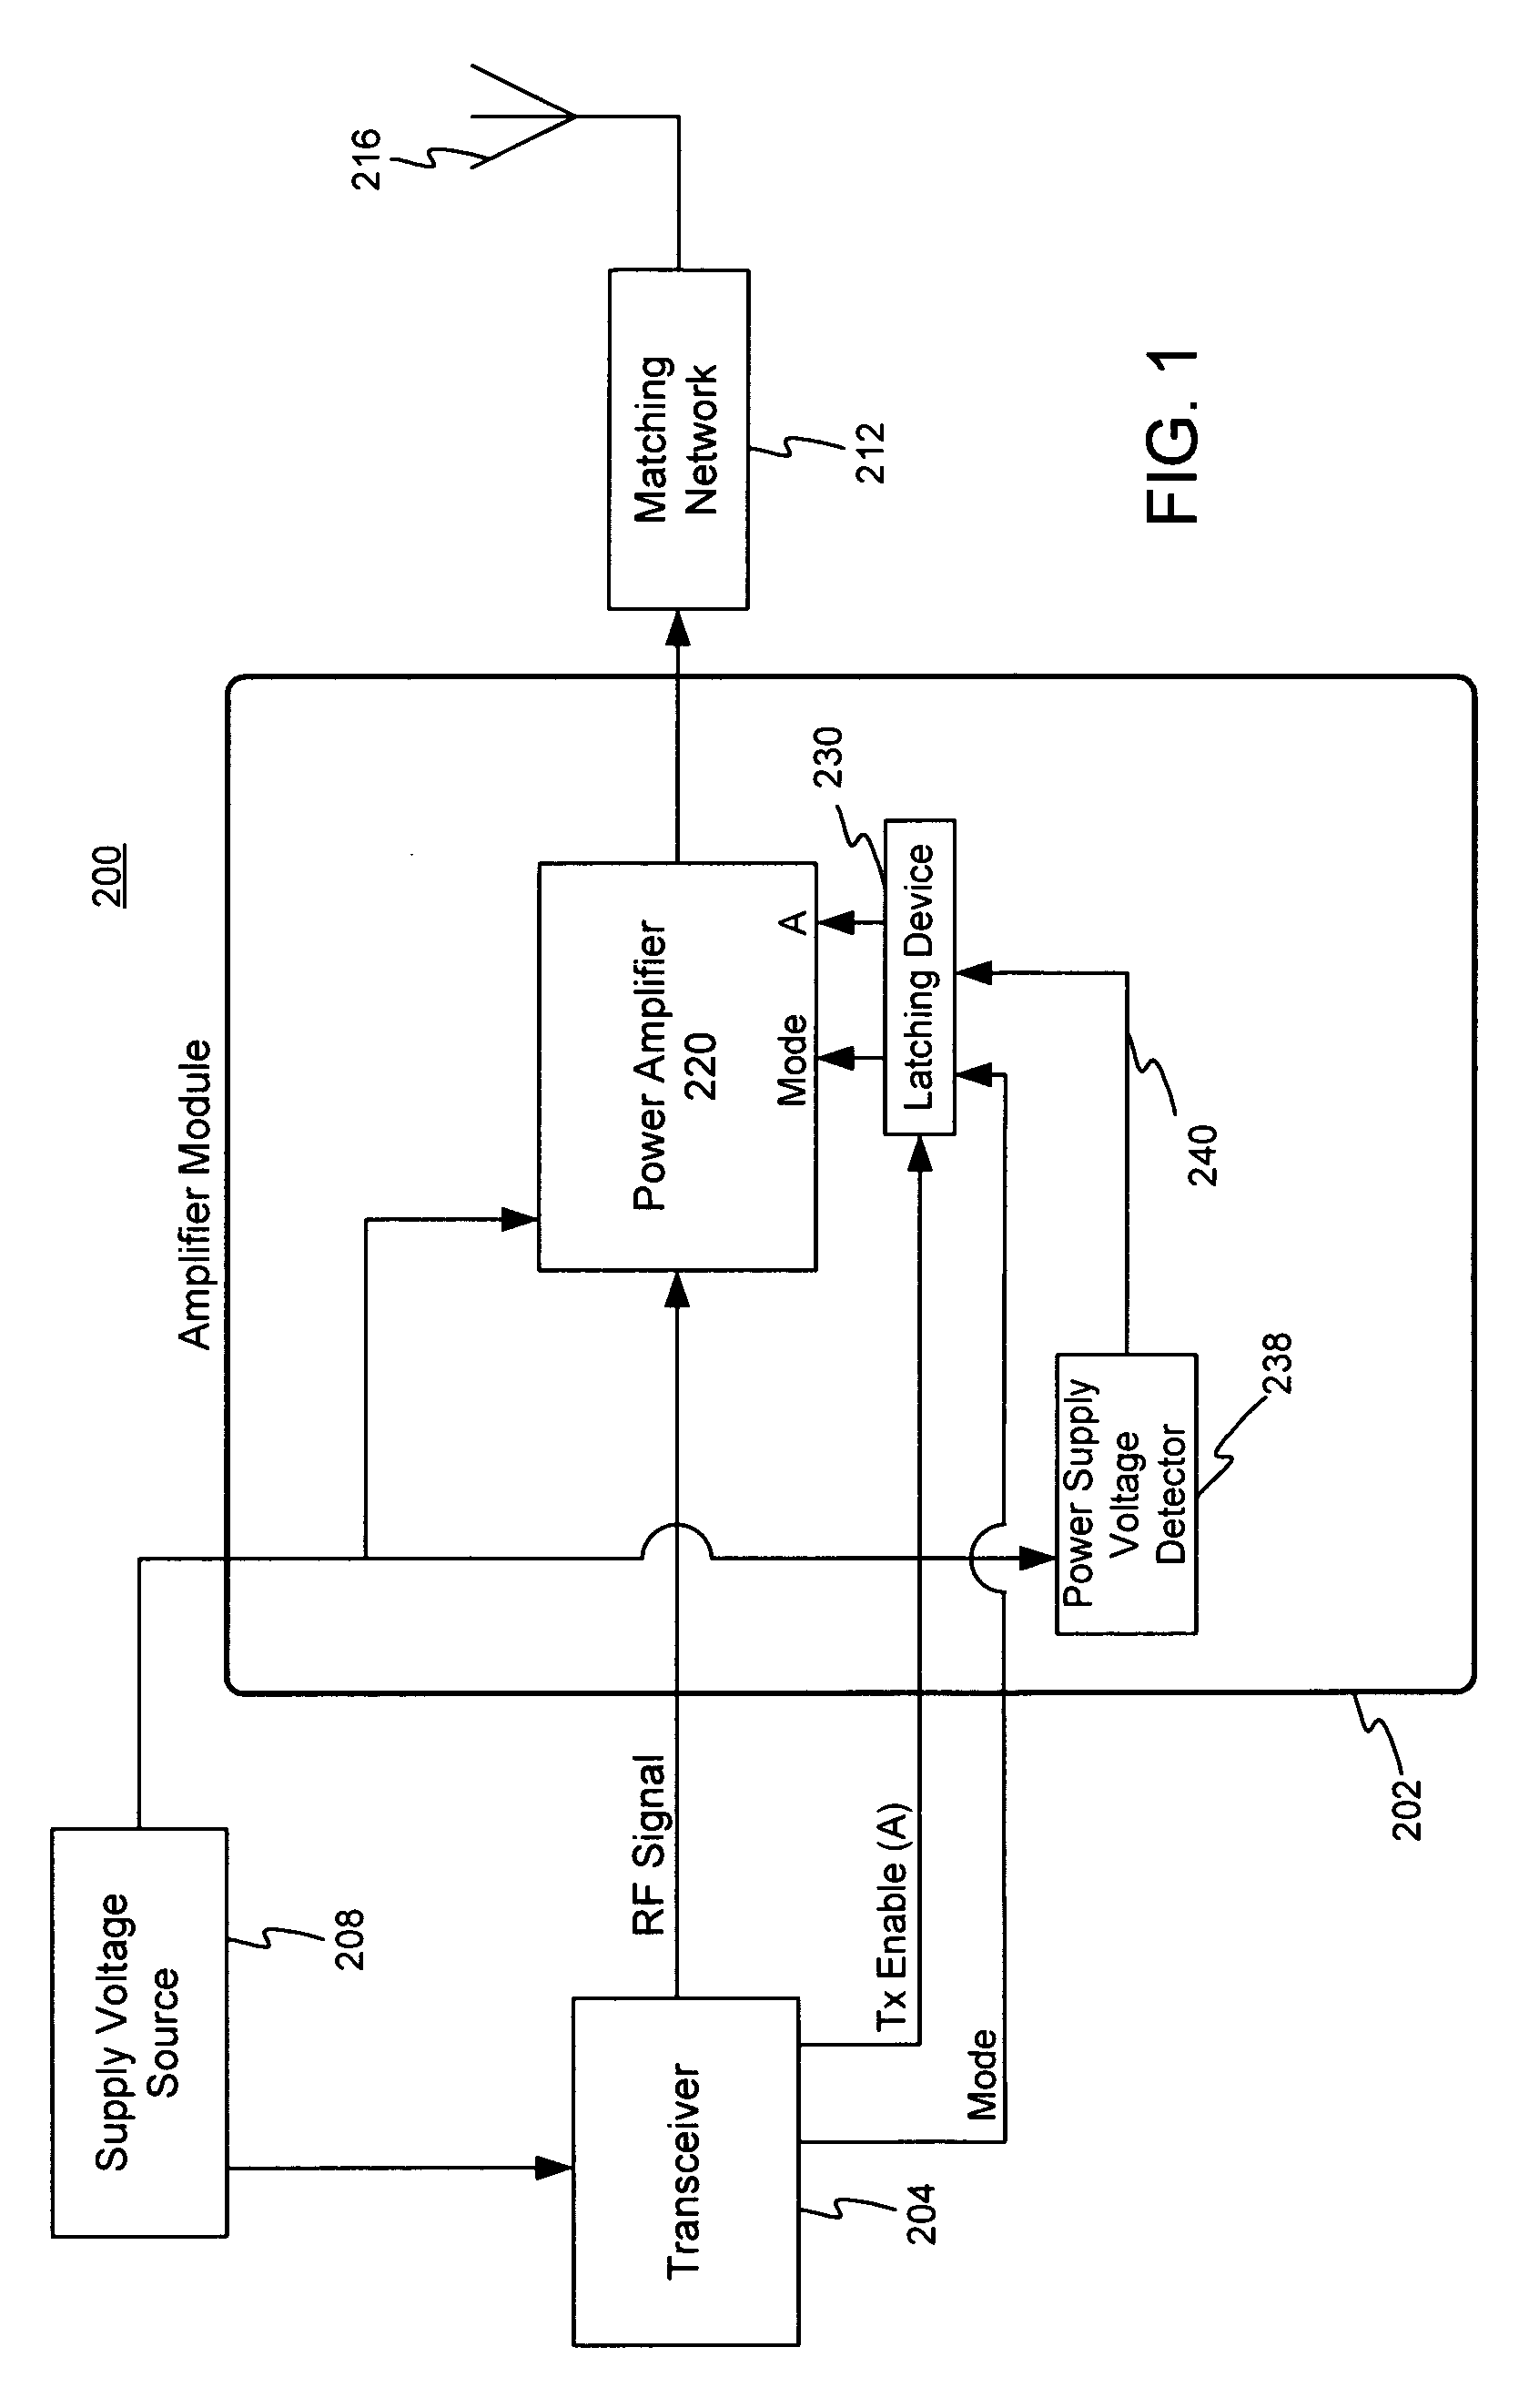 Amplifier gain adjustment in response to reduced supply voltage